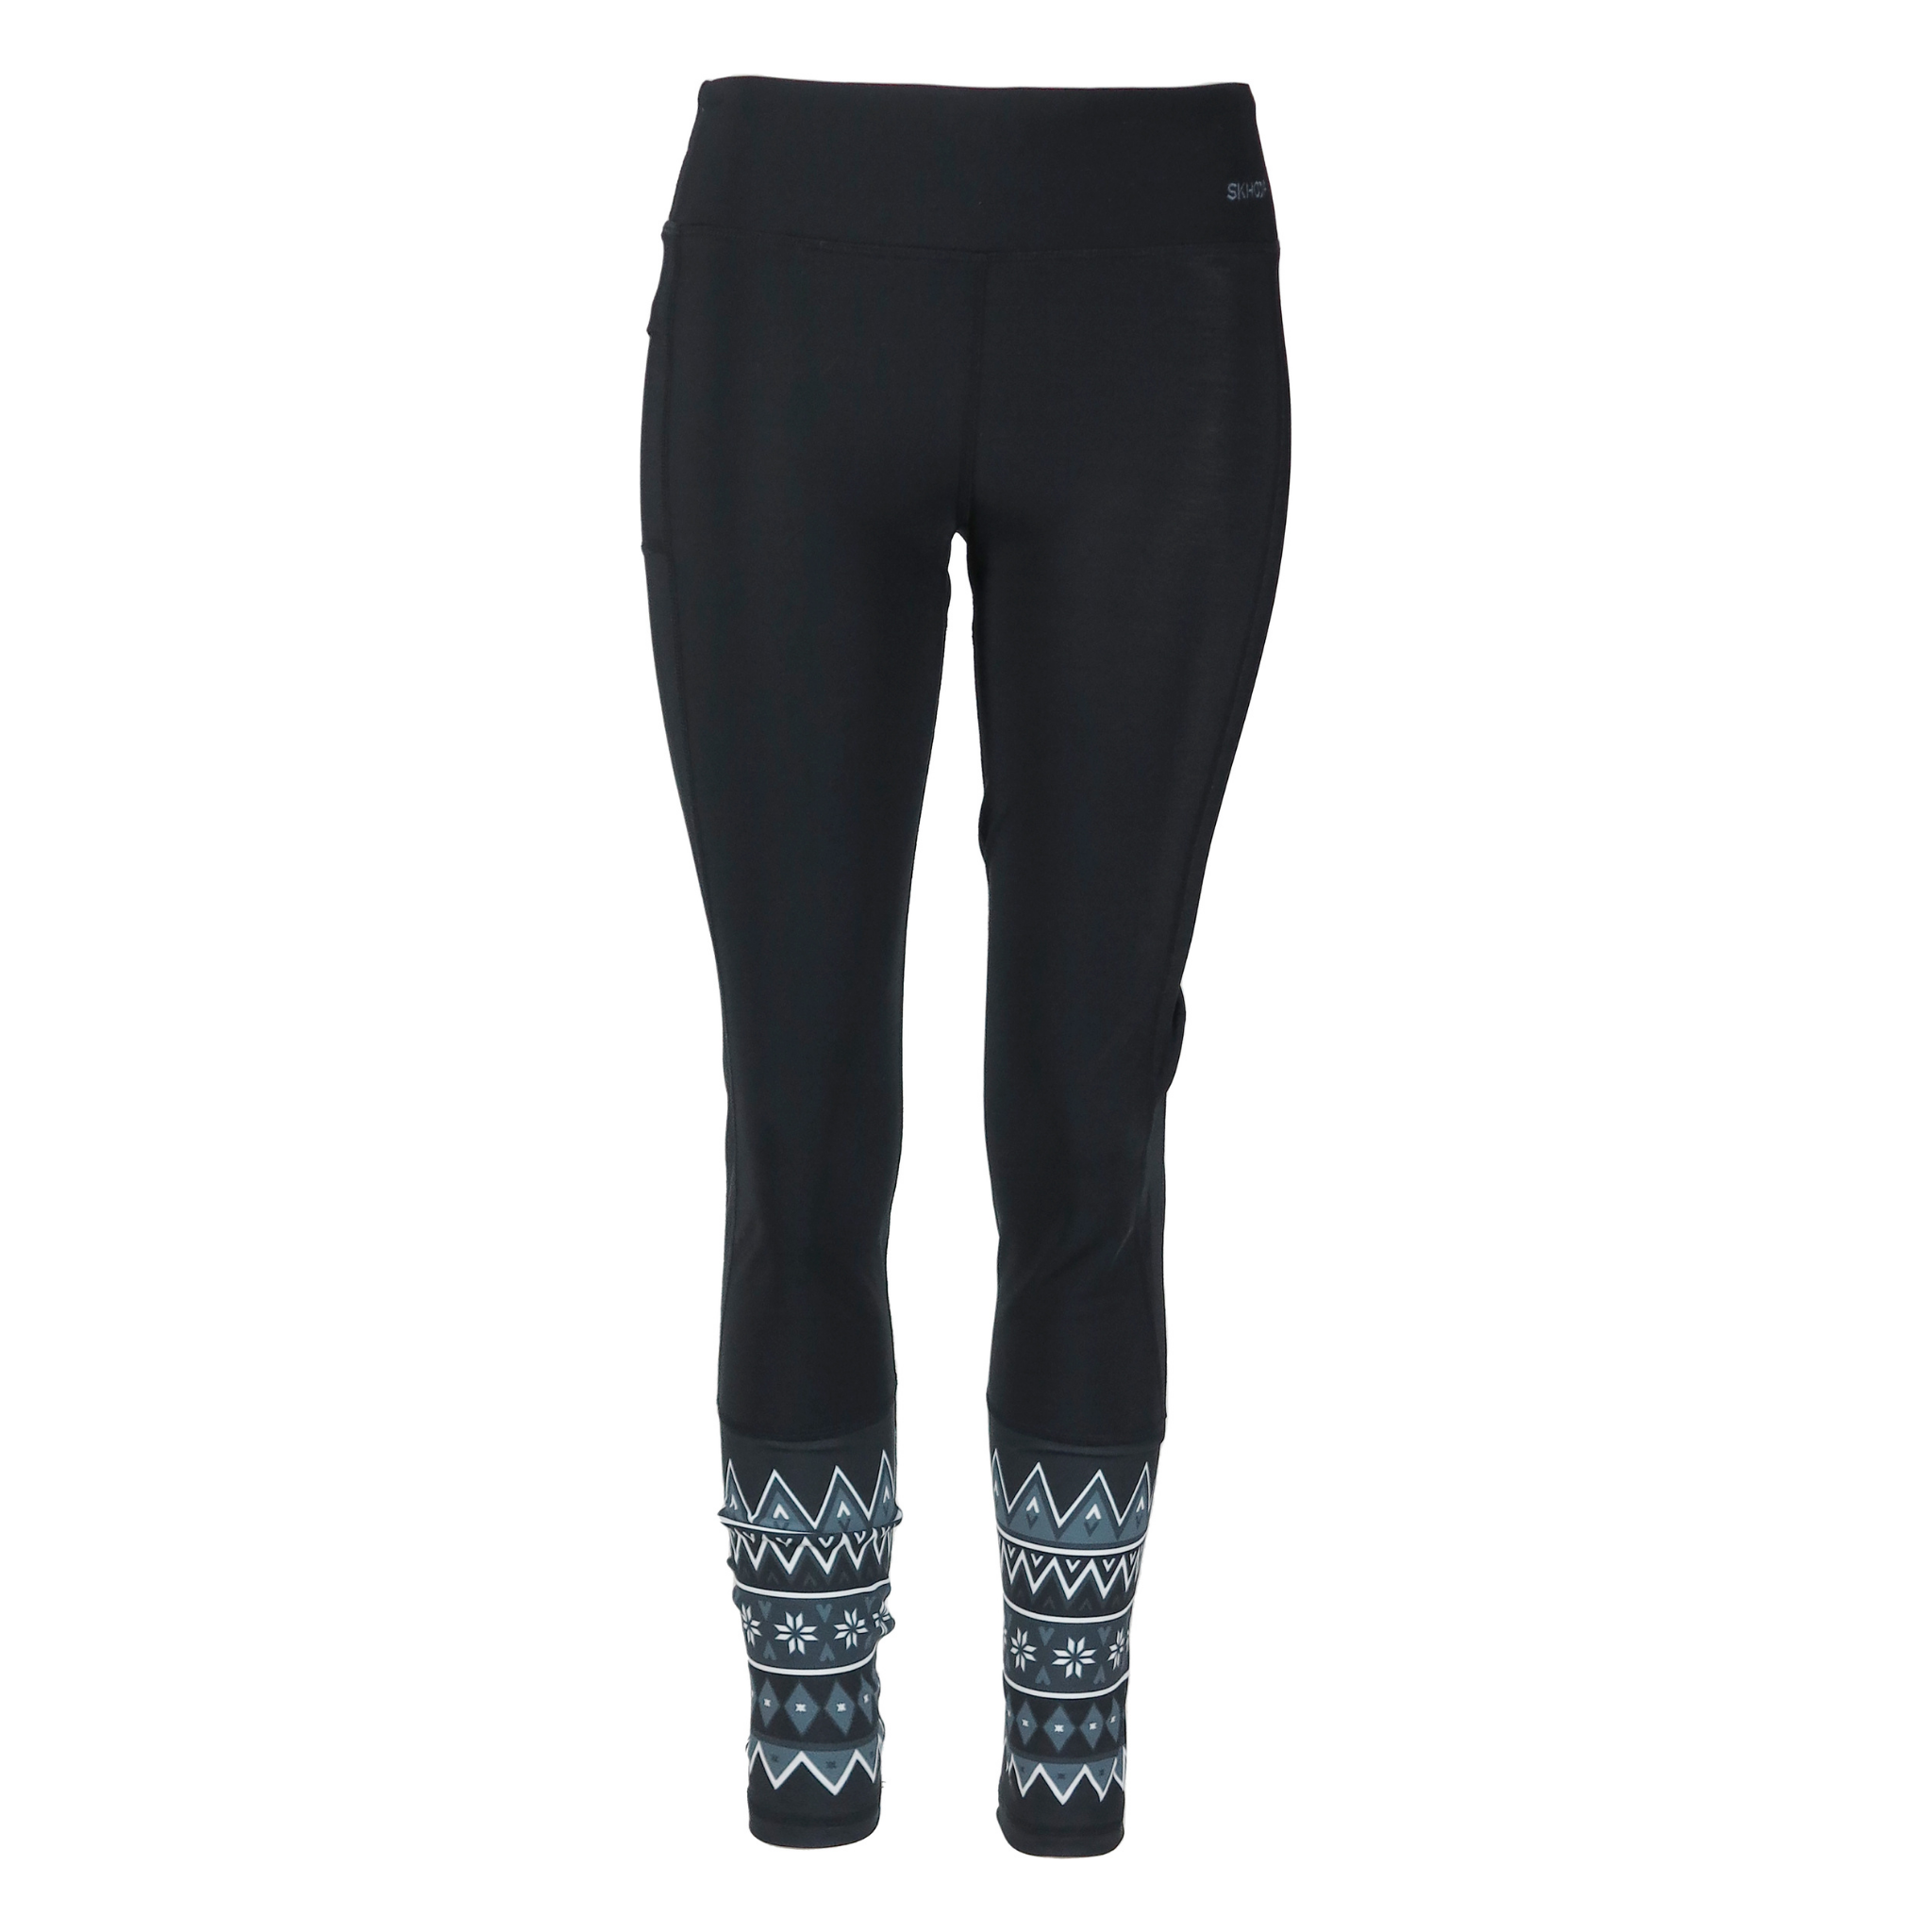 Men's Sports Leggings / Sports Tights Super Sale up to −50